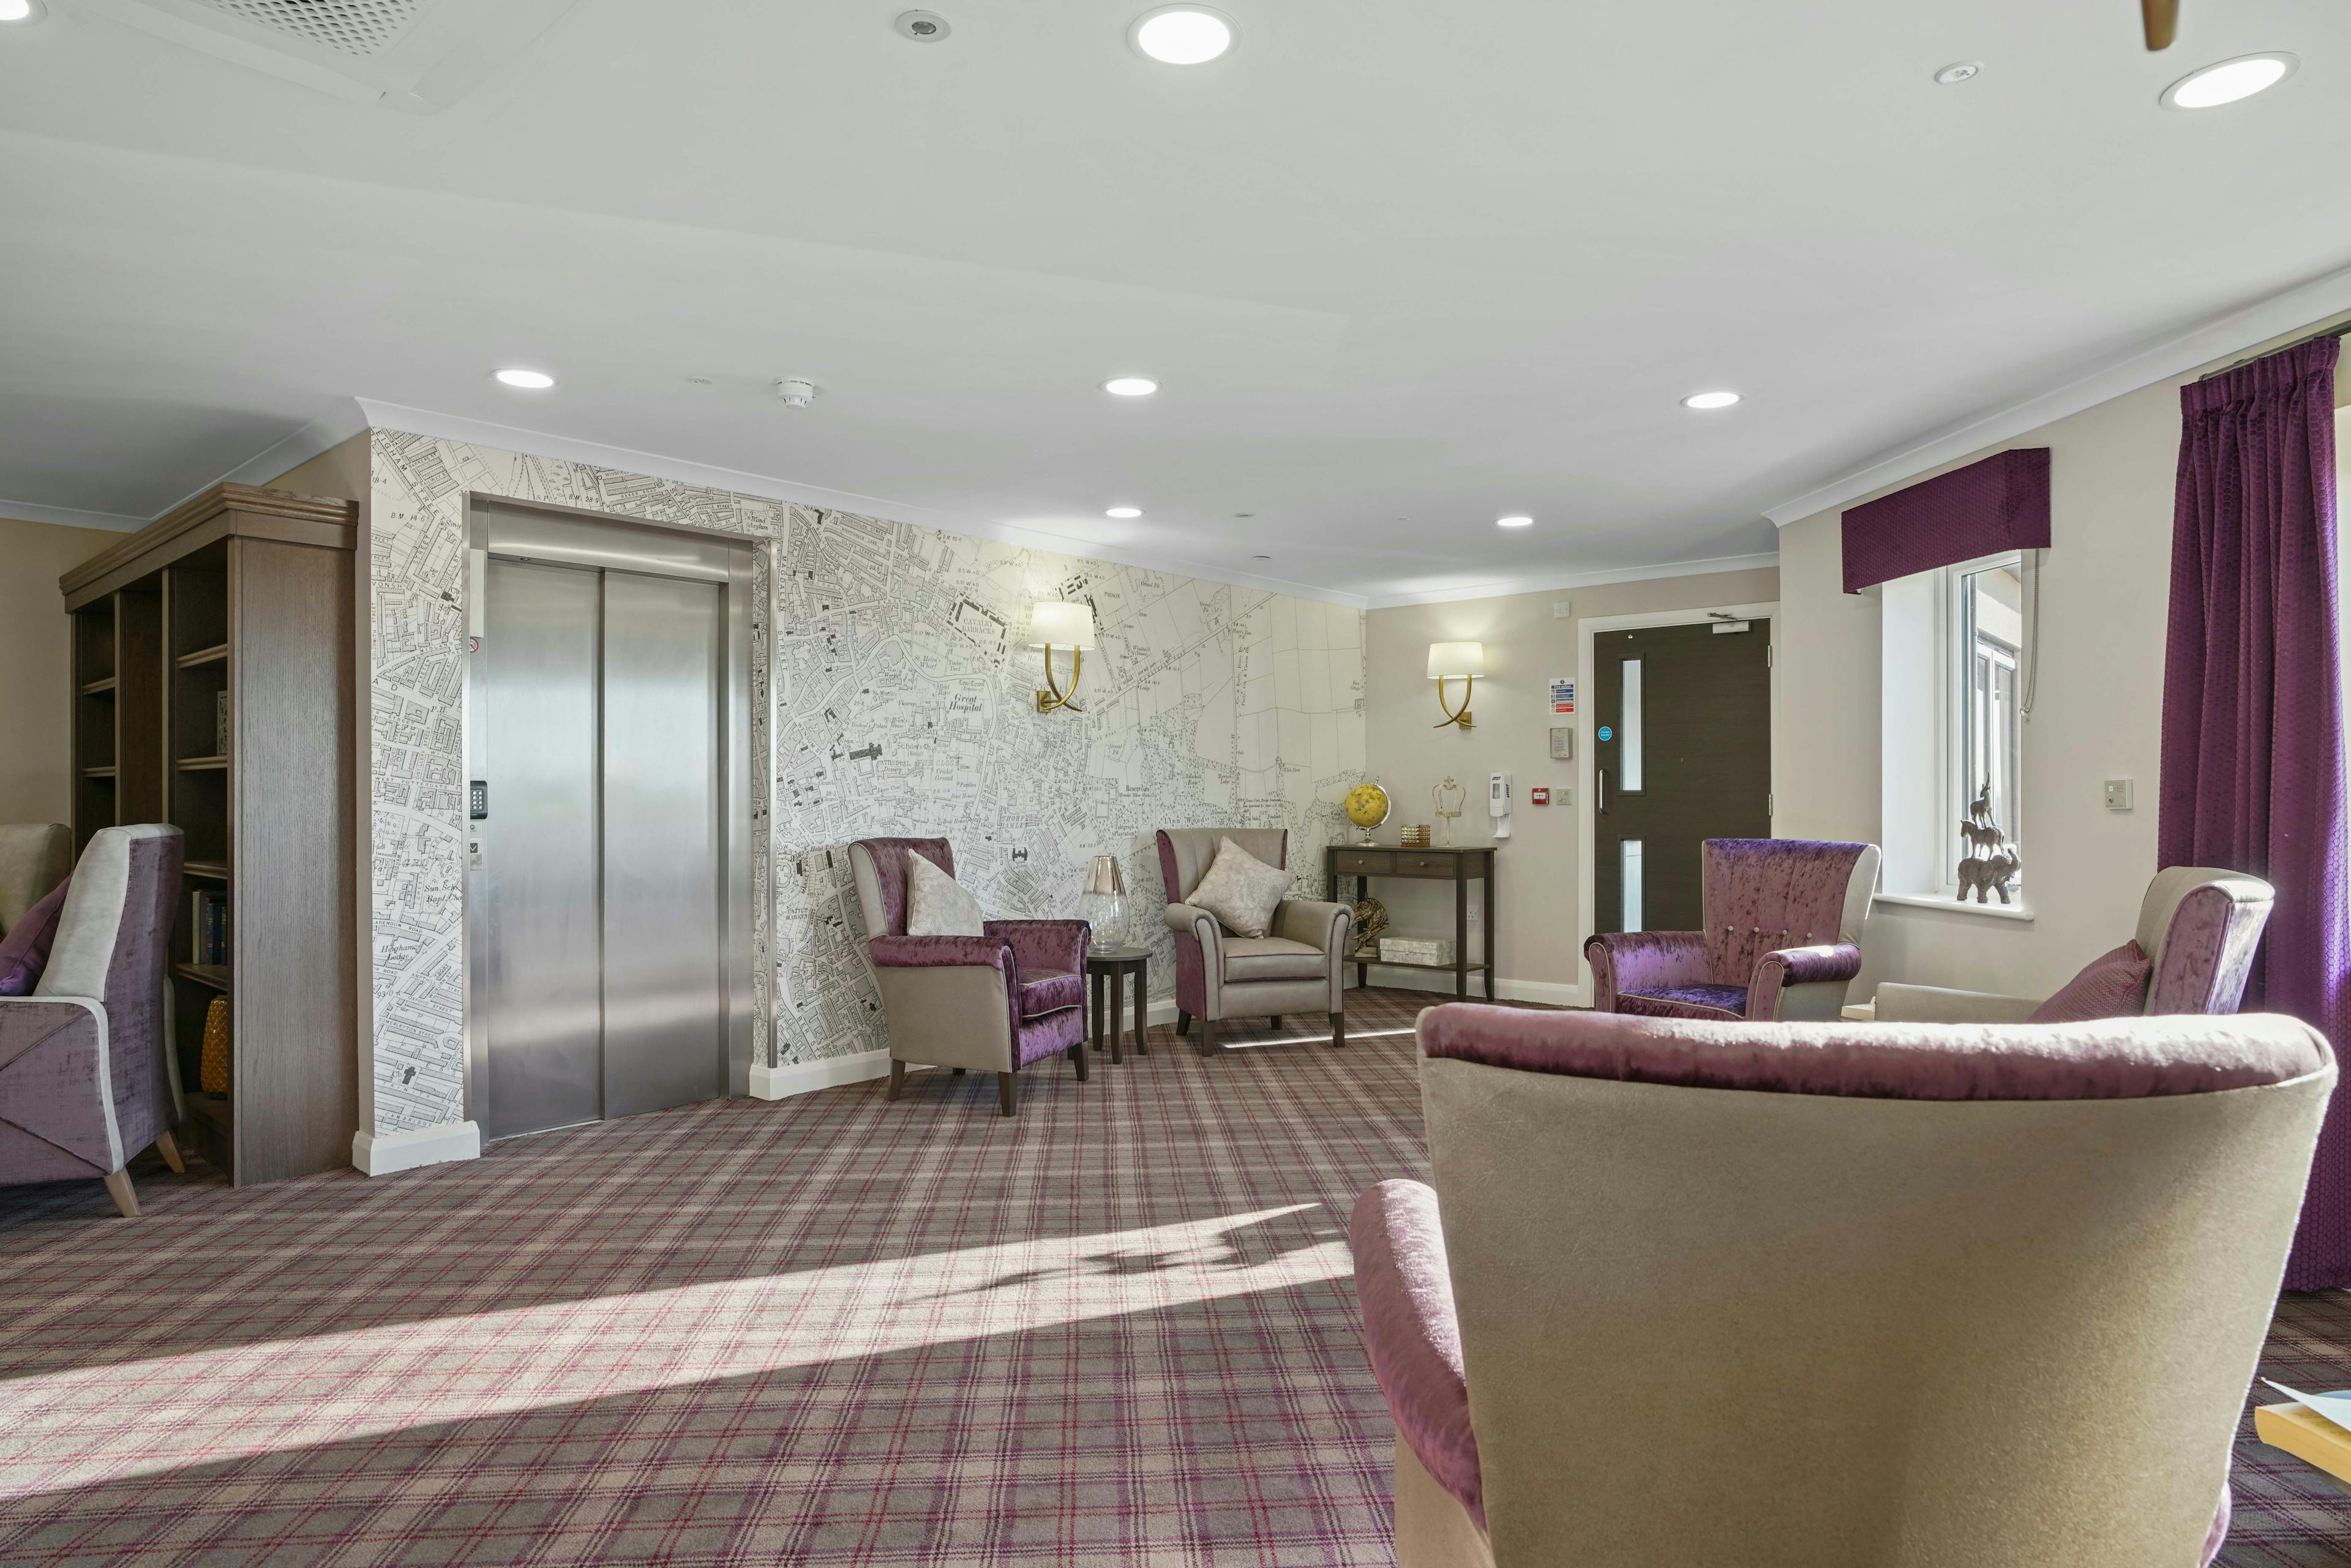 Reception of Tanglewood care home in Horncastle, Lincolnshire